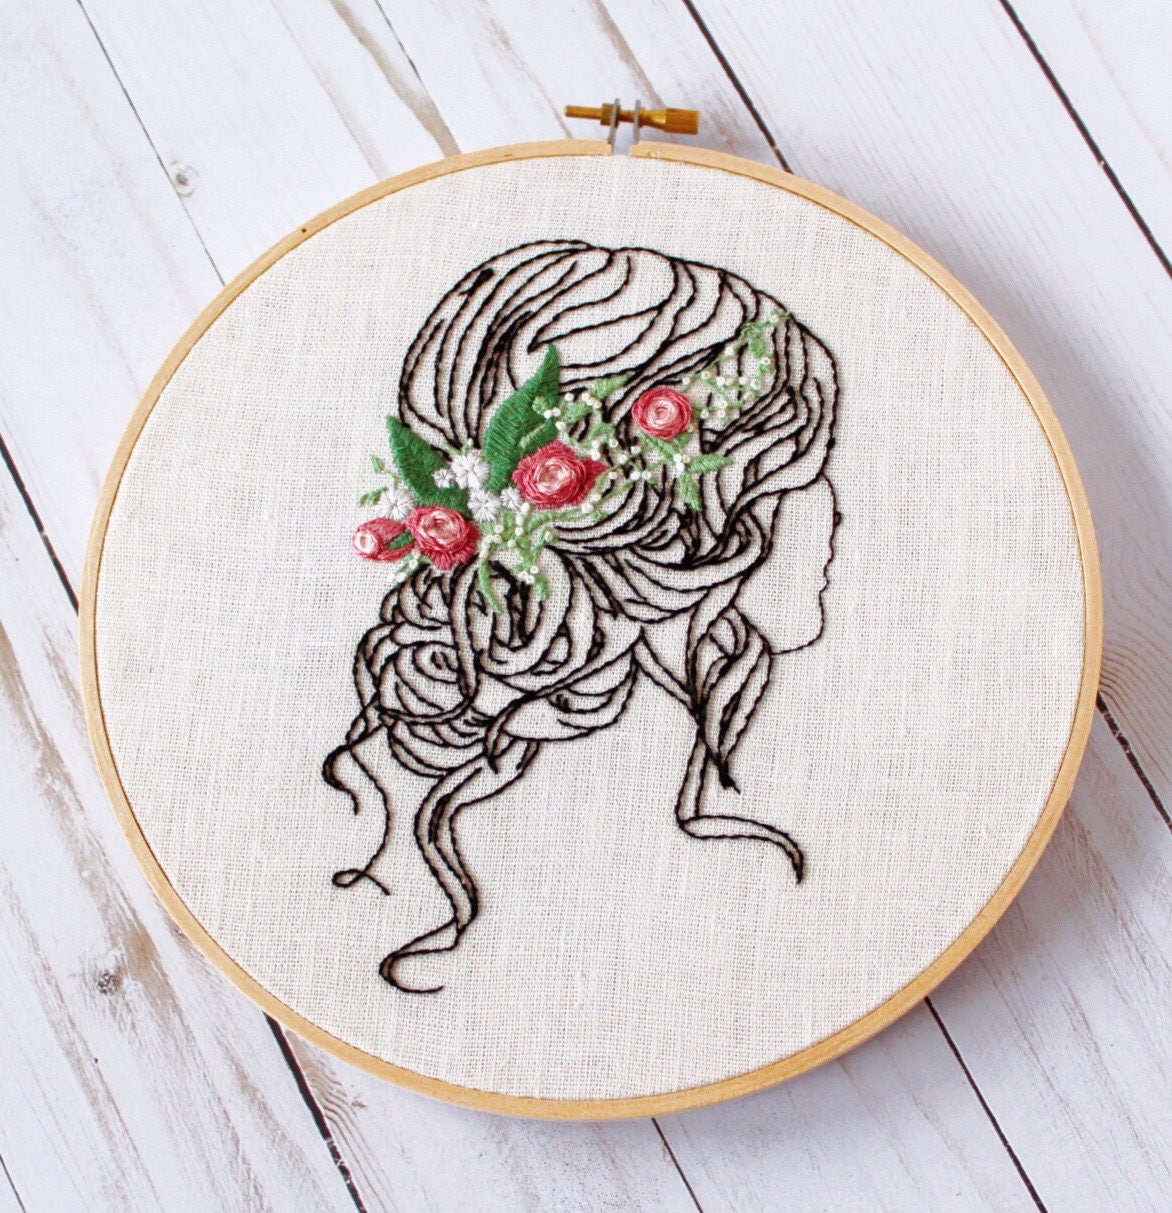 15+ Modern & free hand embroidery patterns - Swoodson Says